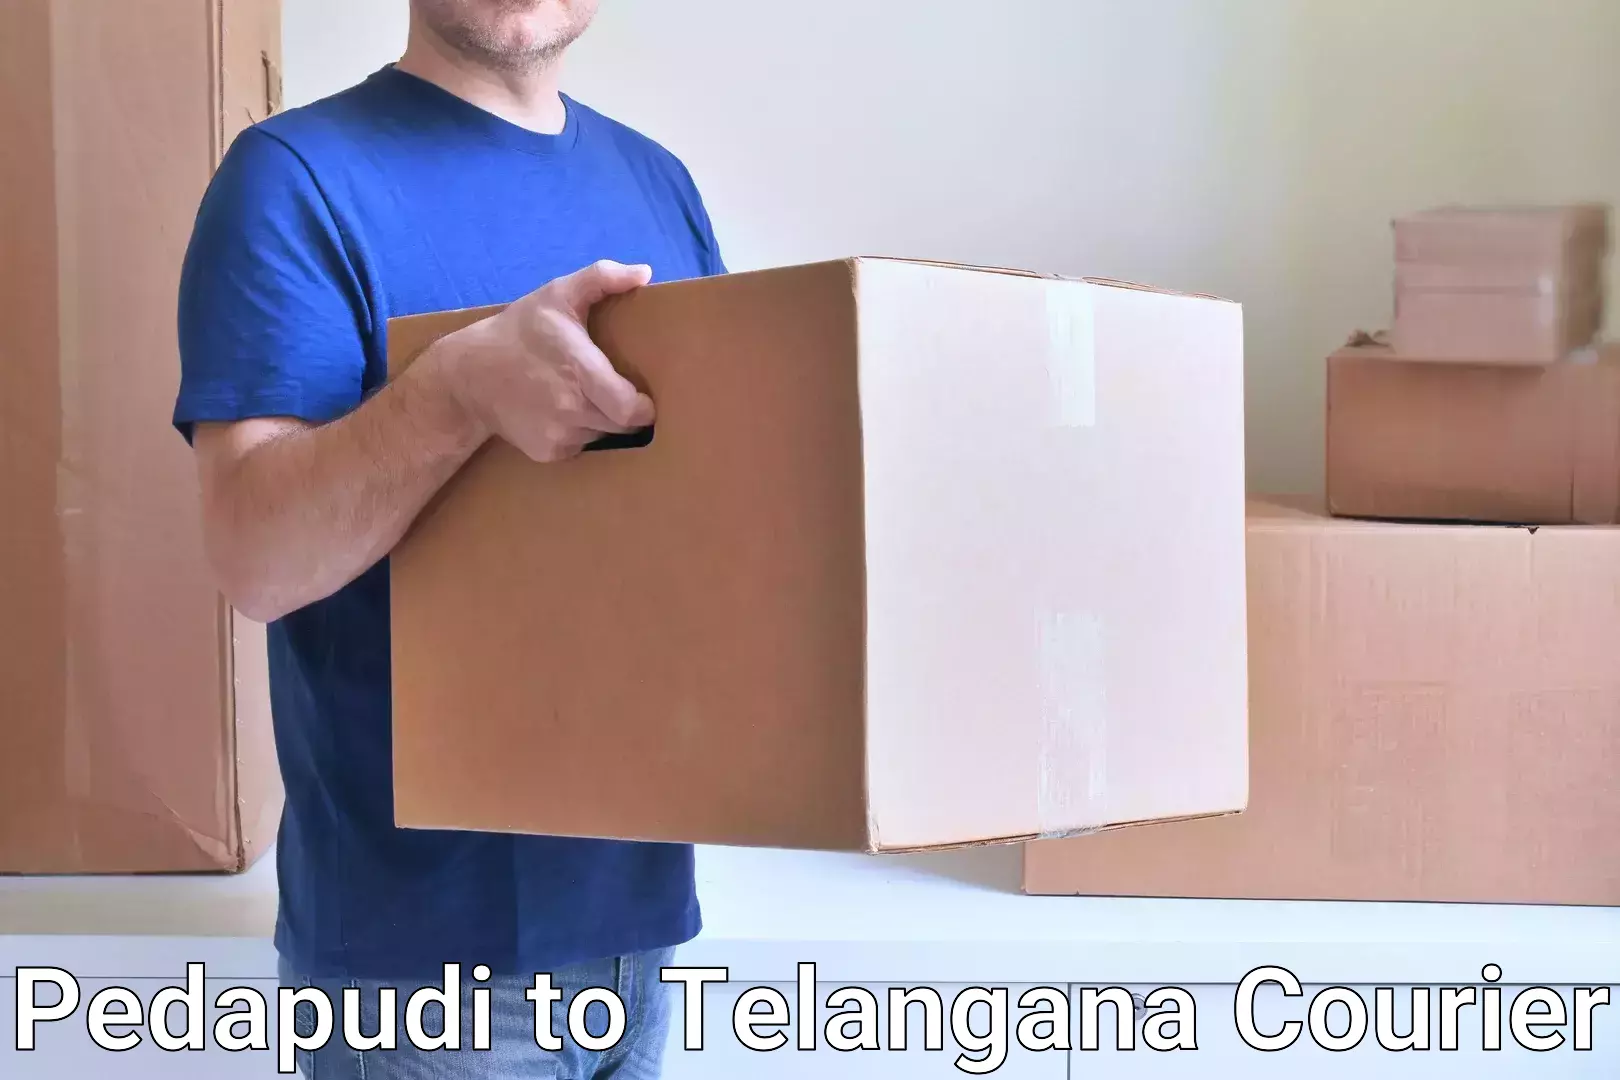 International courier networks Pedapudi to Sultanabad